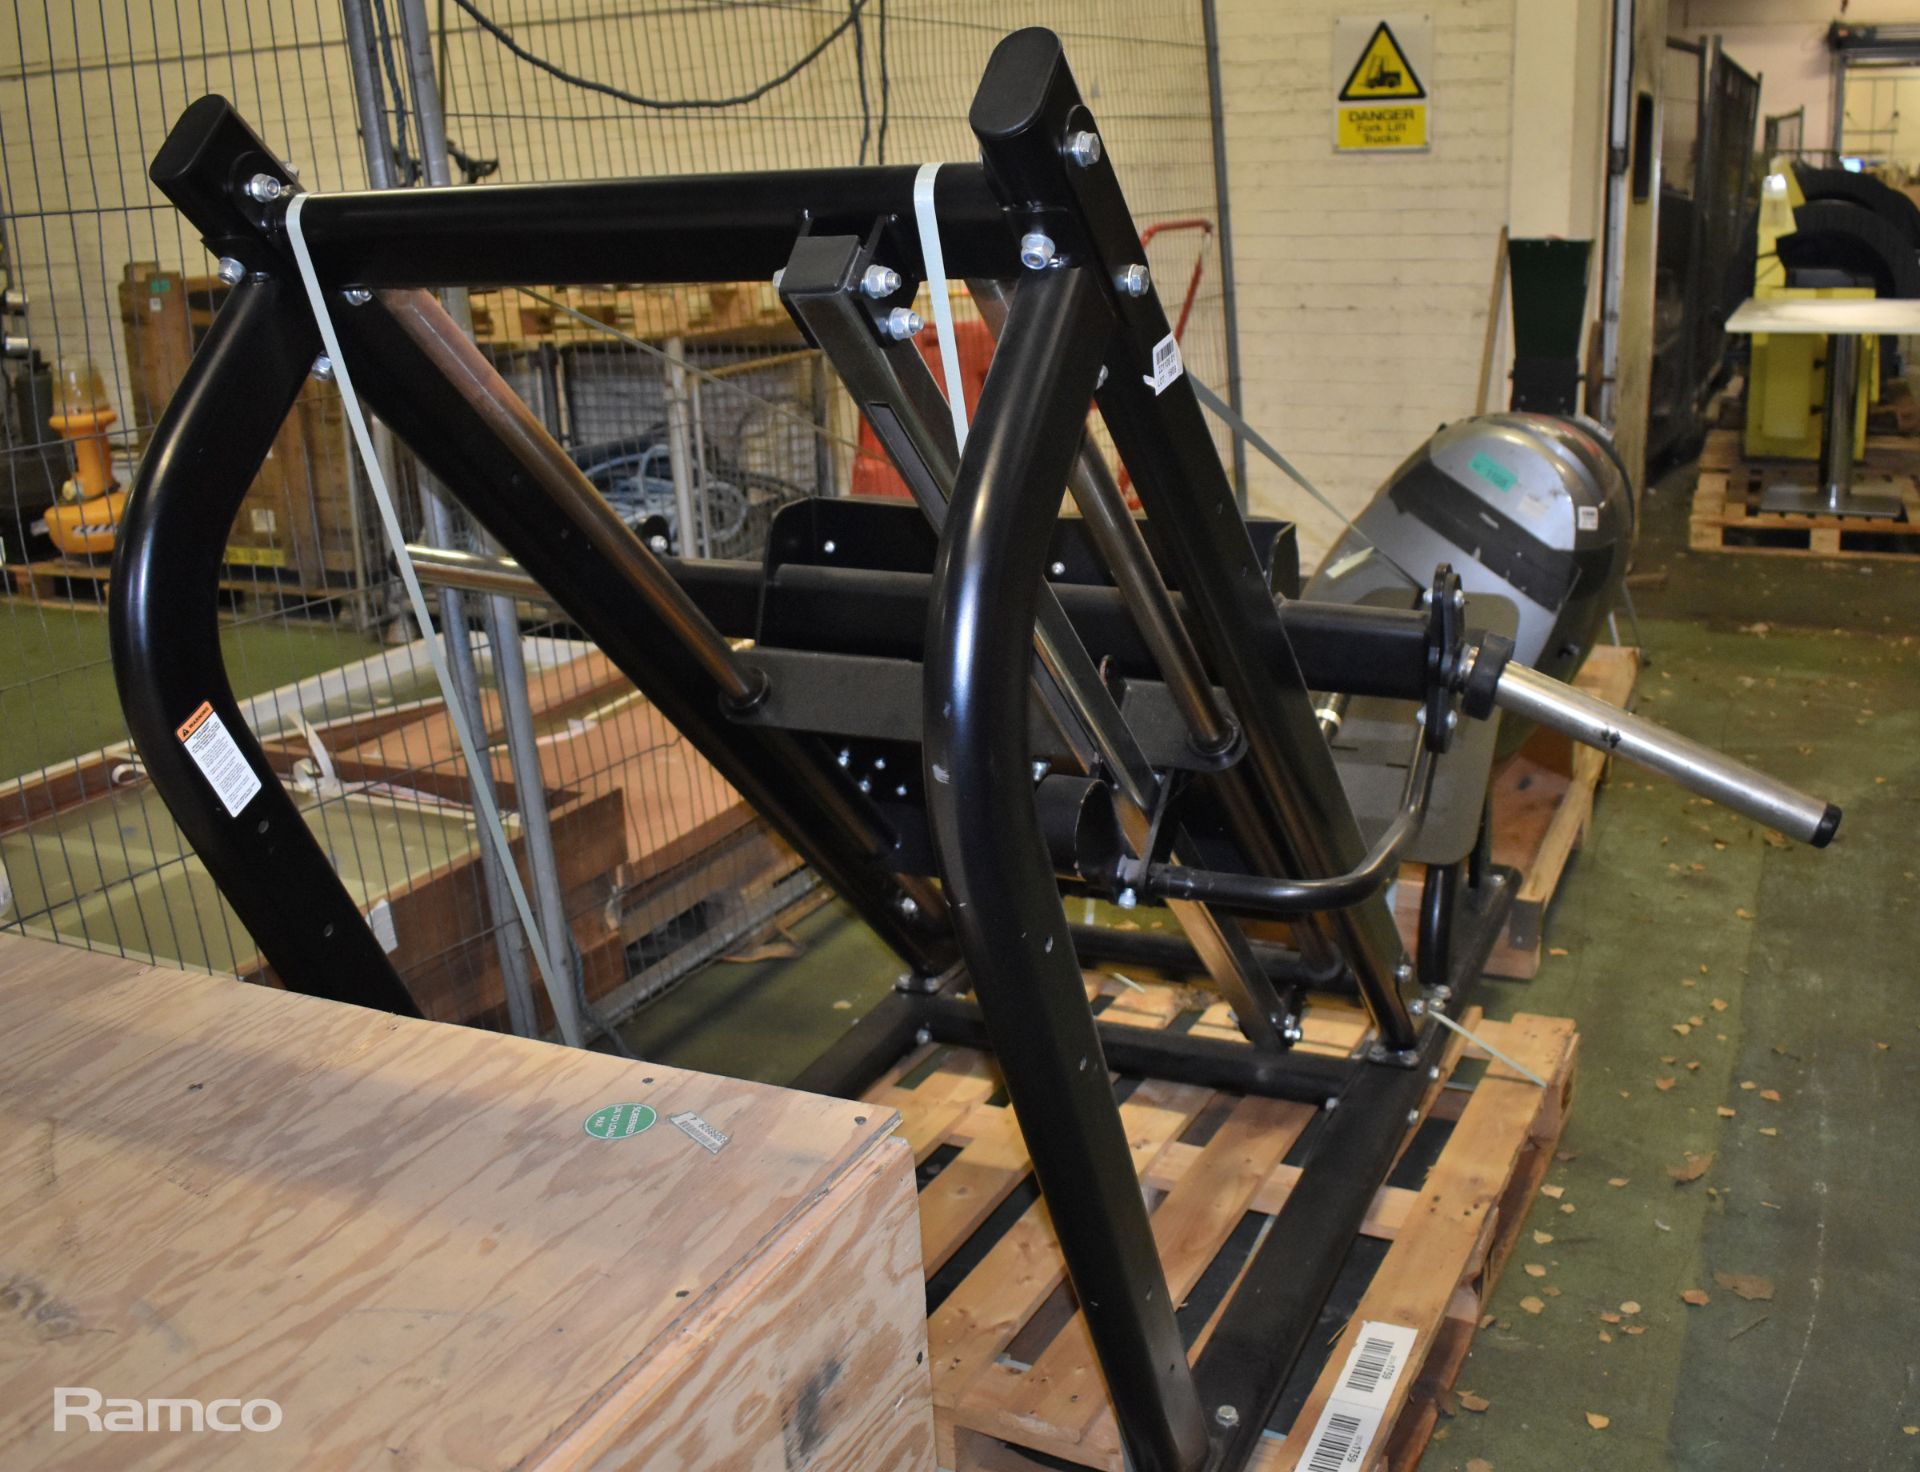 Exigo-UK 45 degree hack squat - as spares or repairs (damage to weight plate arms) - Image 2 of 6